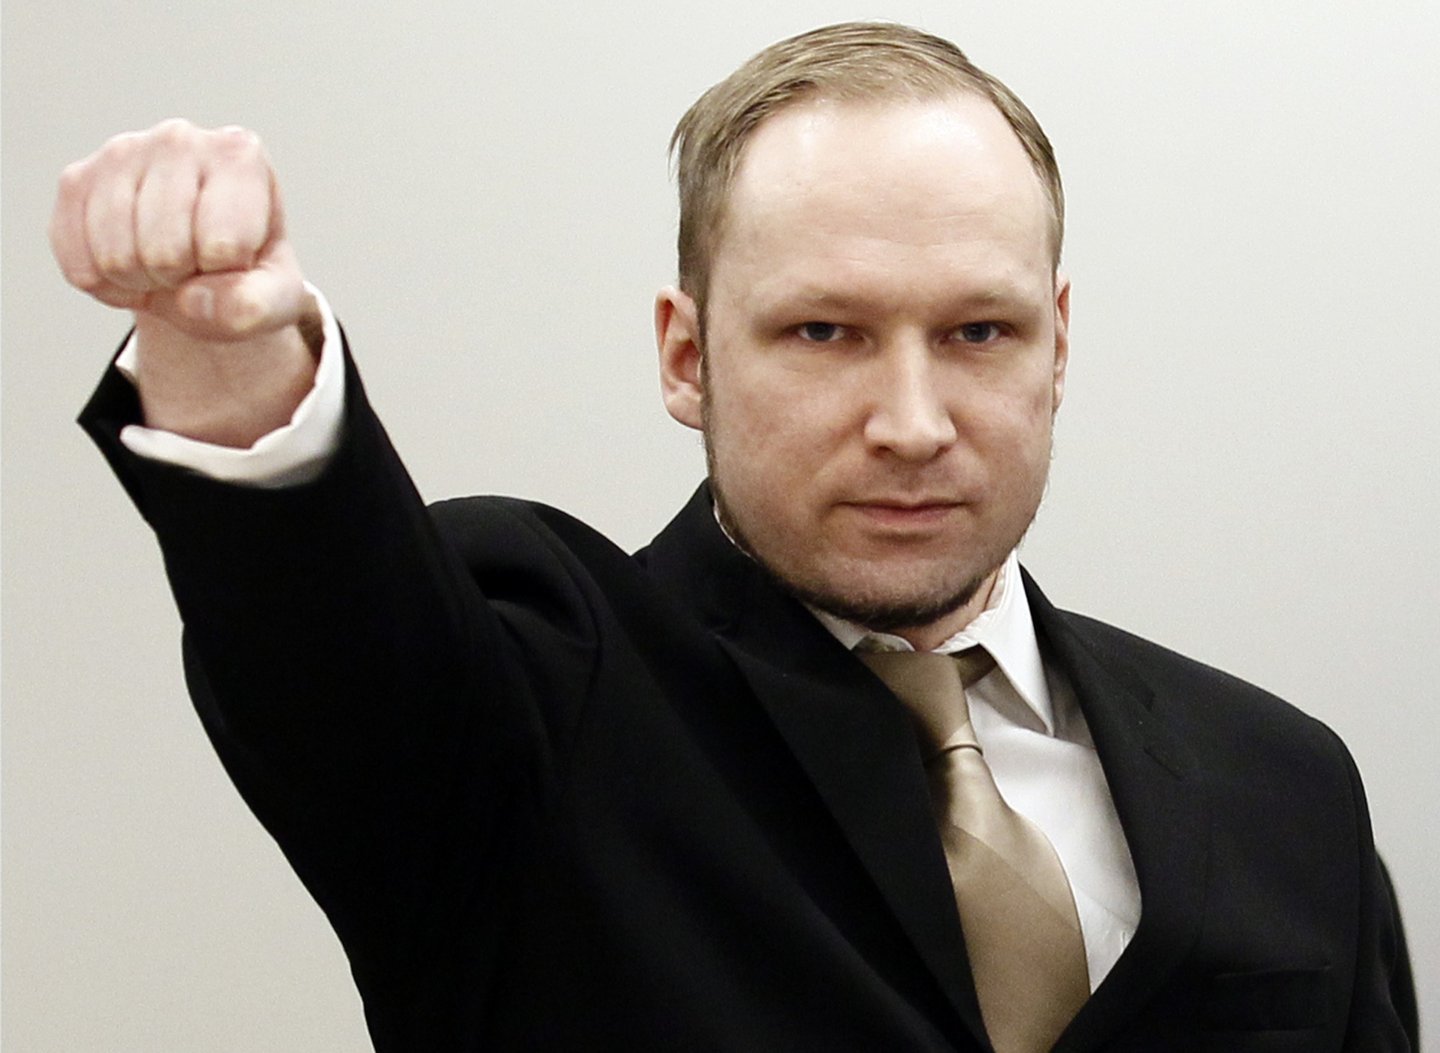 Rightwing extremist Anders Behring Breivik, who killed 77 people in twin attacks in Norway last year, makes a farright salute as he enters the Oslo district courtroom at the opening of his trial on April 16, 2012. Breivik told the Court that he did not recognise its legitimacy. Since Breivik has already confessed to the deadliest attacks in post-war Norway, the main line of questioning will revolve around whether he is criminally sane and accountable for his actions, which will determine if he is to be sentenced to prison or a closed psychiatric ward. AFP PHOTO / POOL / HEIKO JUNGE / AFP / POOL / HEIKO JUNGE (Photo credit should read HEIKO JUNGE/AFP/Getty Images)